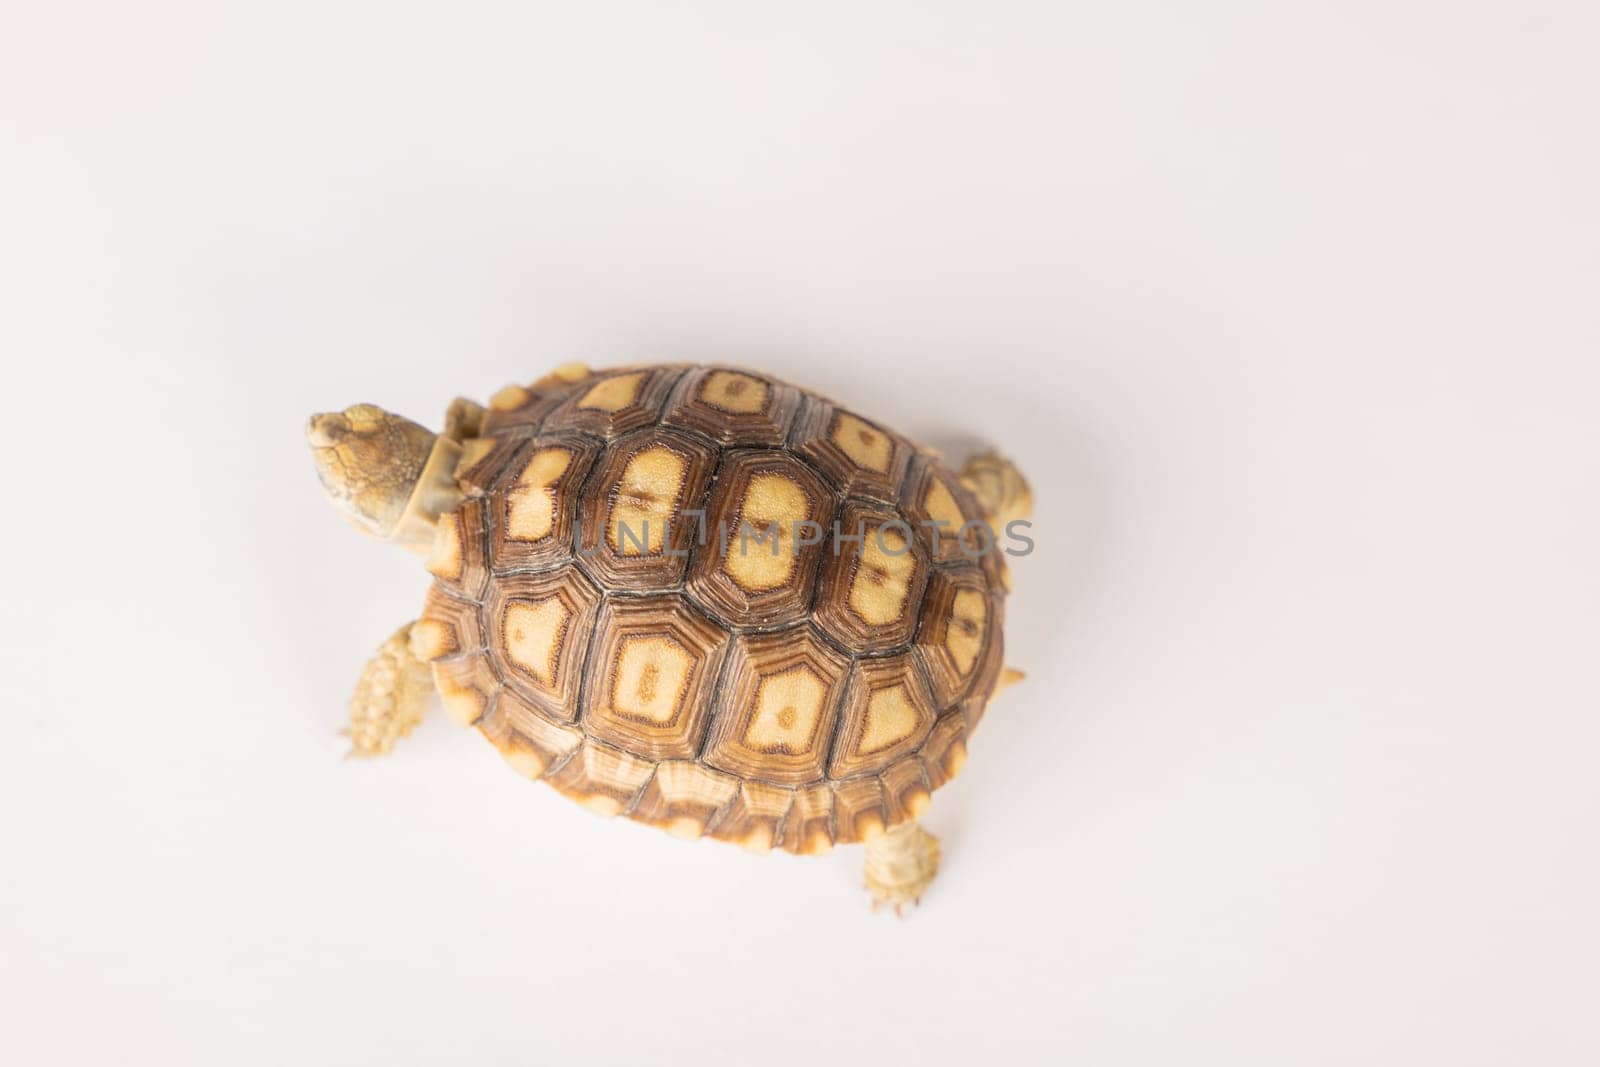 In this isolated portrait, a little African spurred tortoise reveals the beauty of its unique design and cute features against a white background.